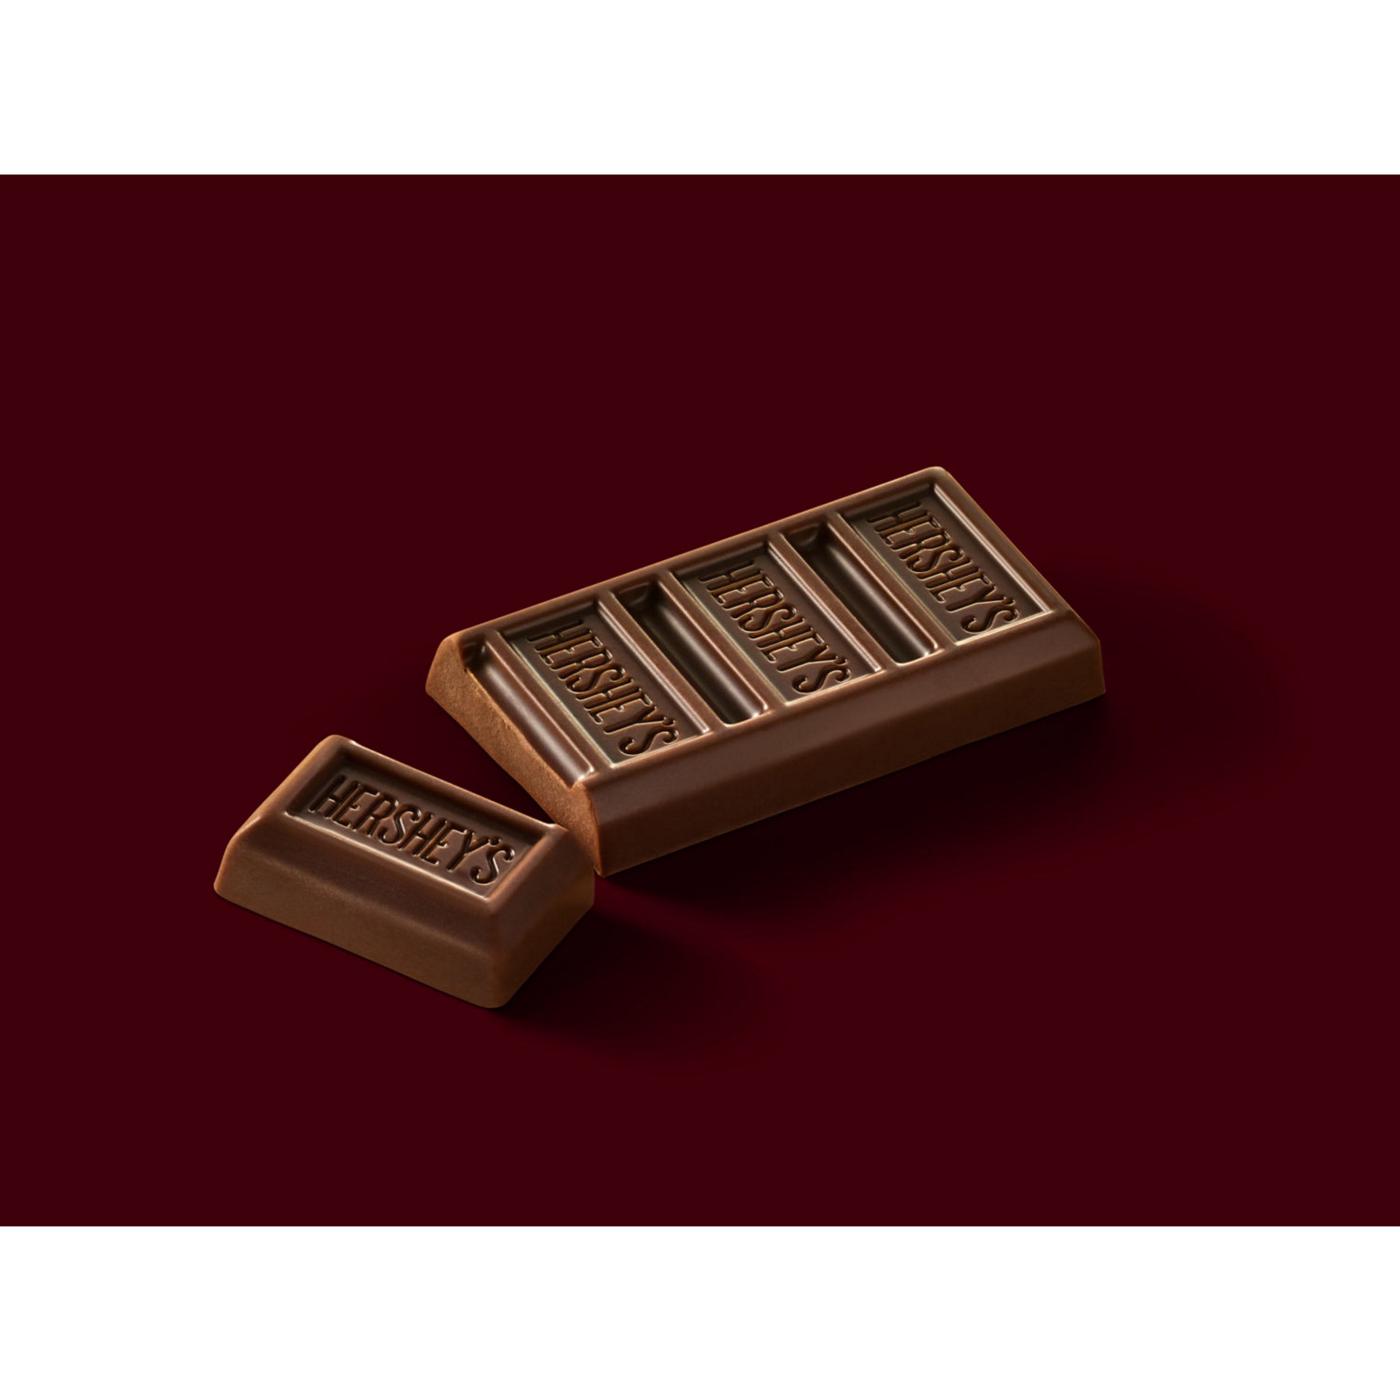 Hershey's Milk Chocolate Snack Size Candy Bars; image 4 of 4